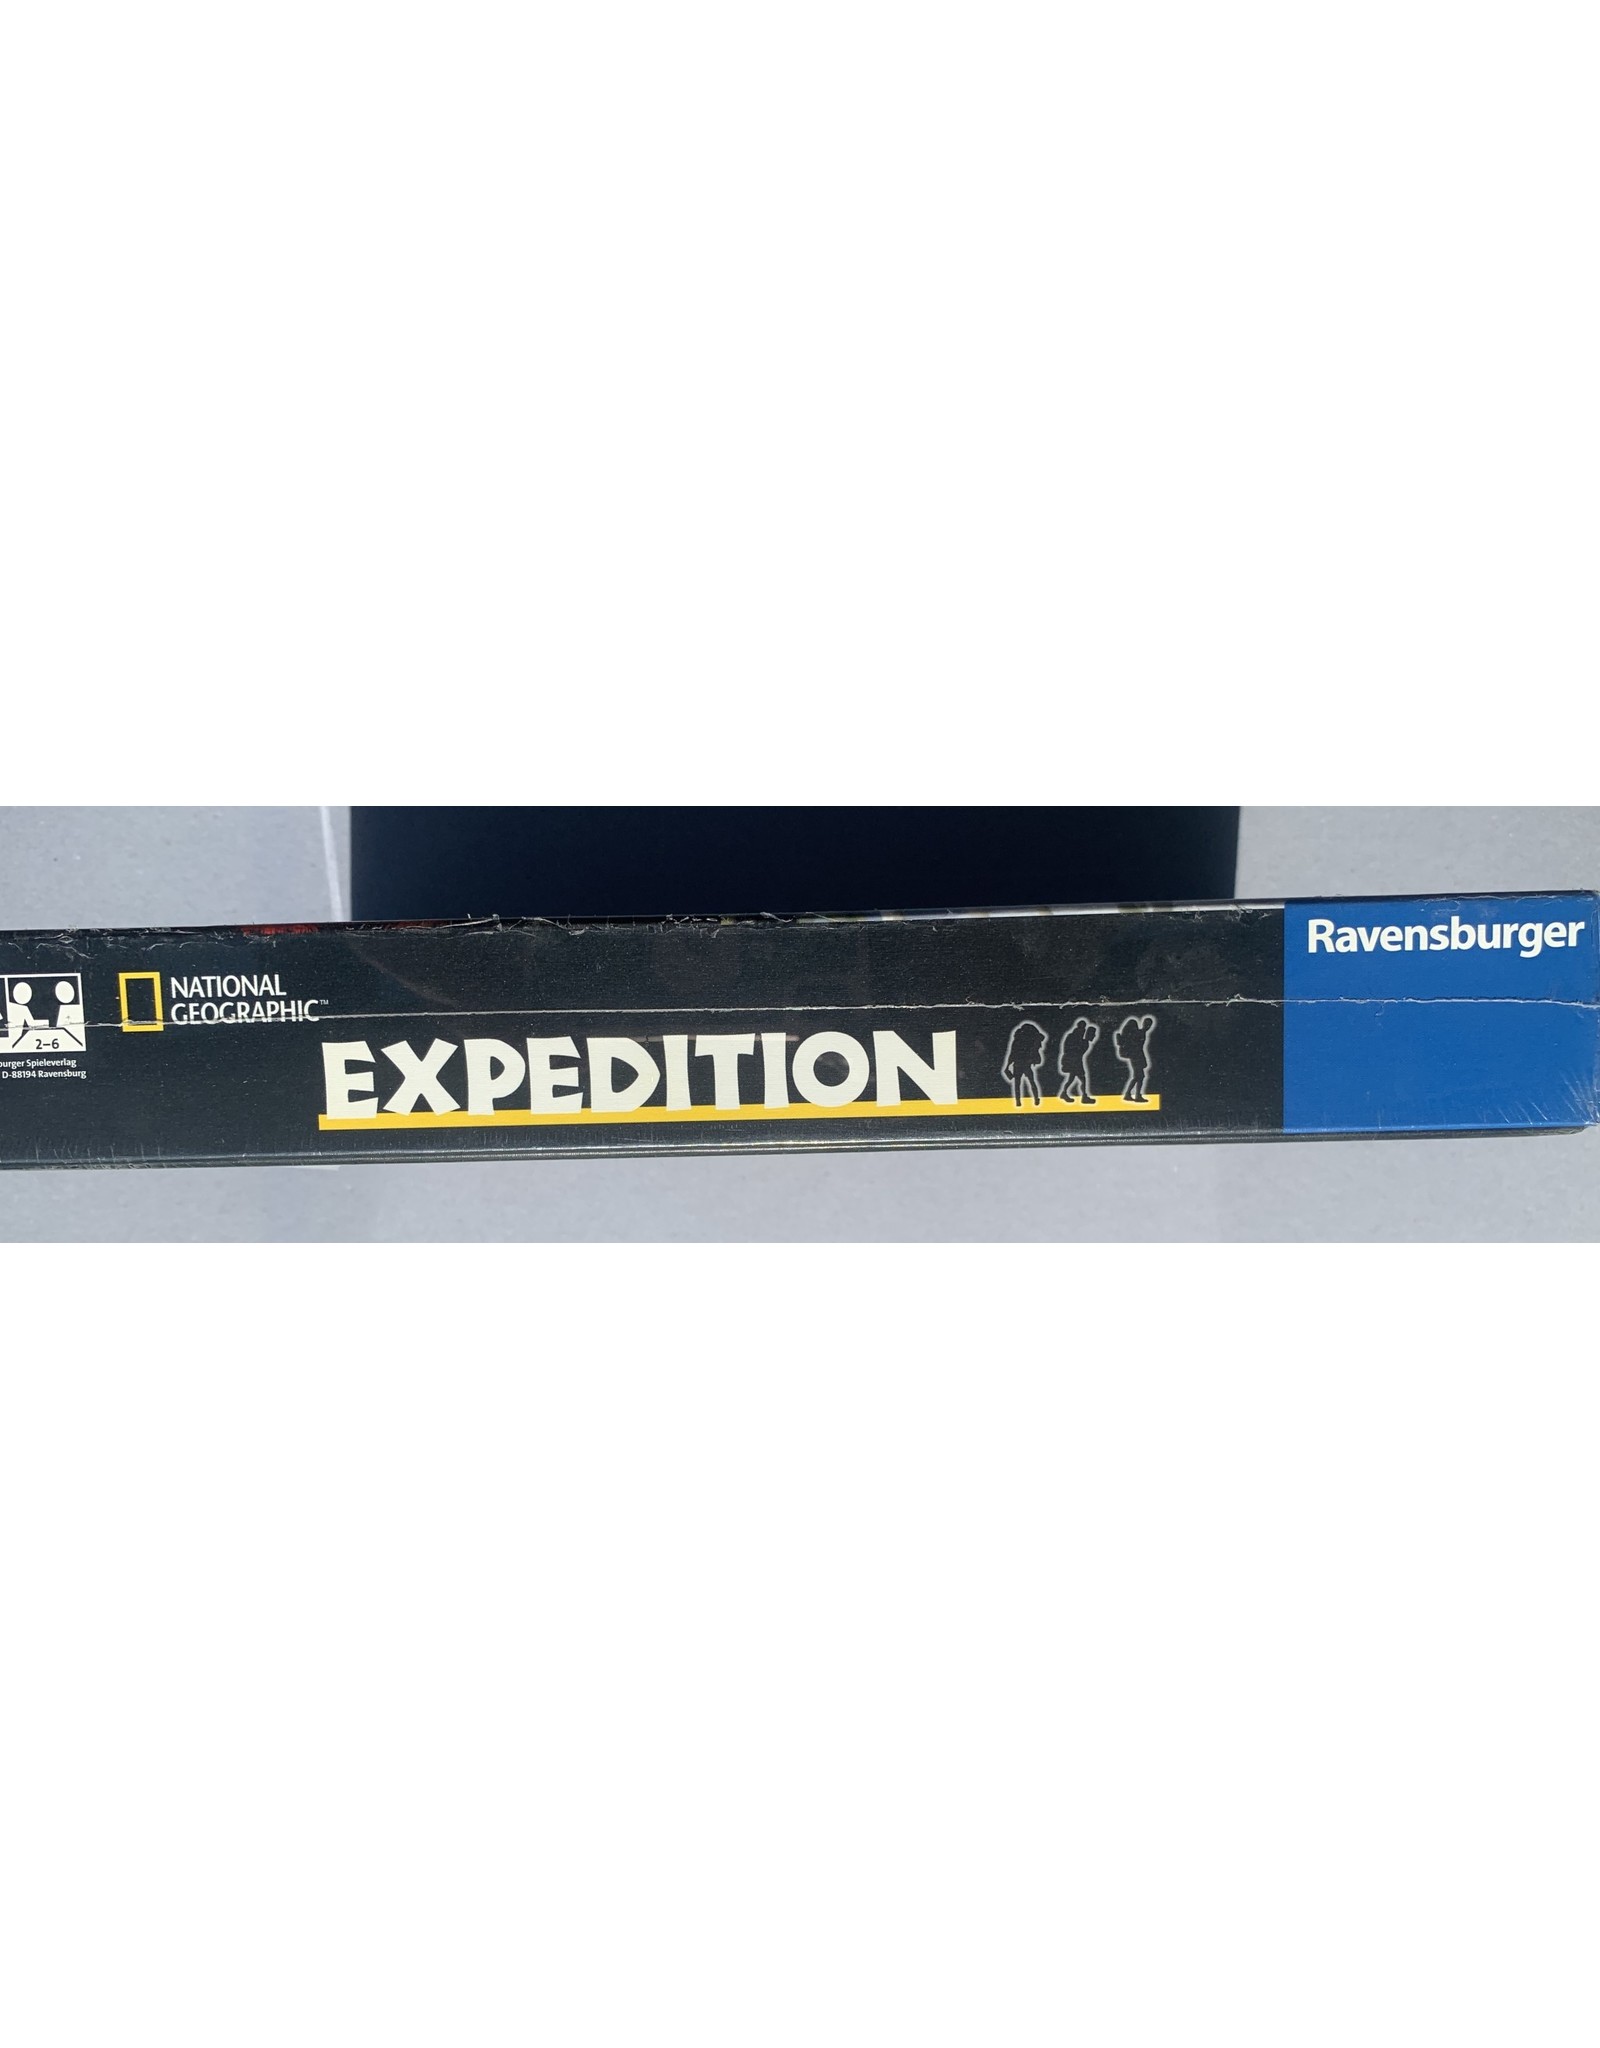 Ravensburger Expedition (1996) NIS